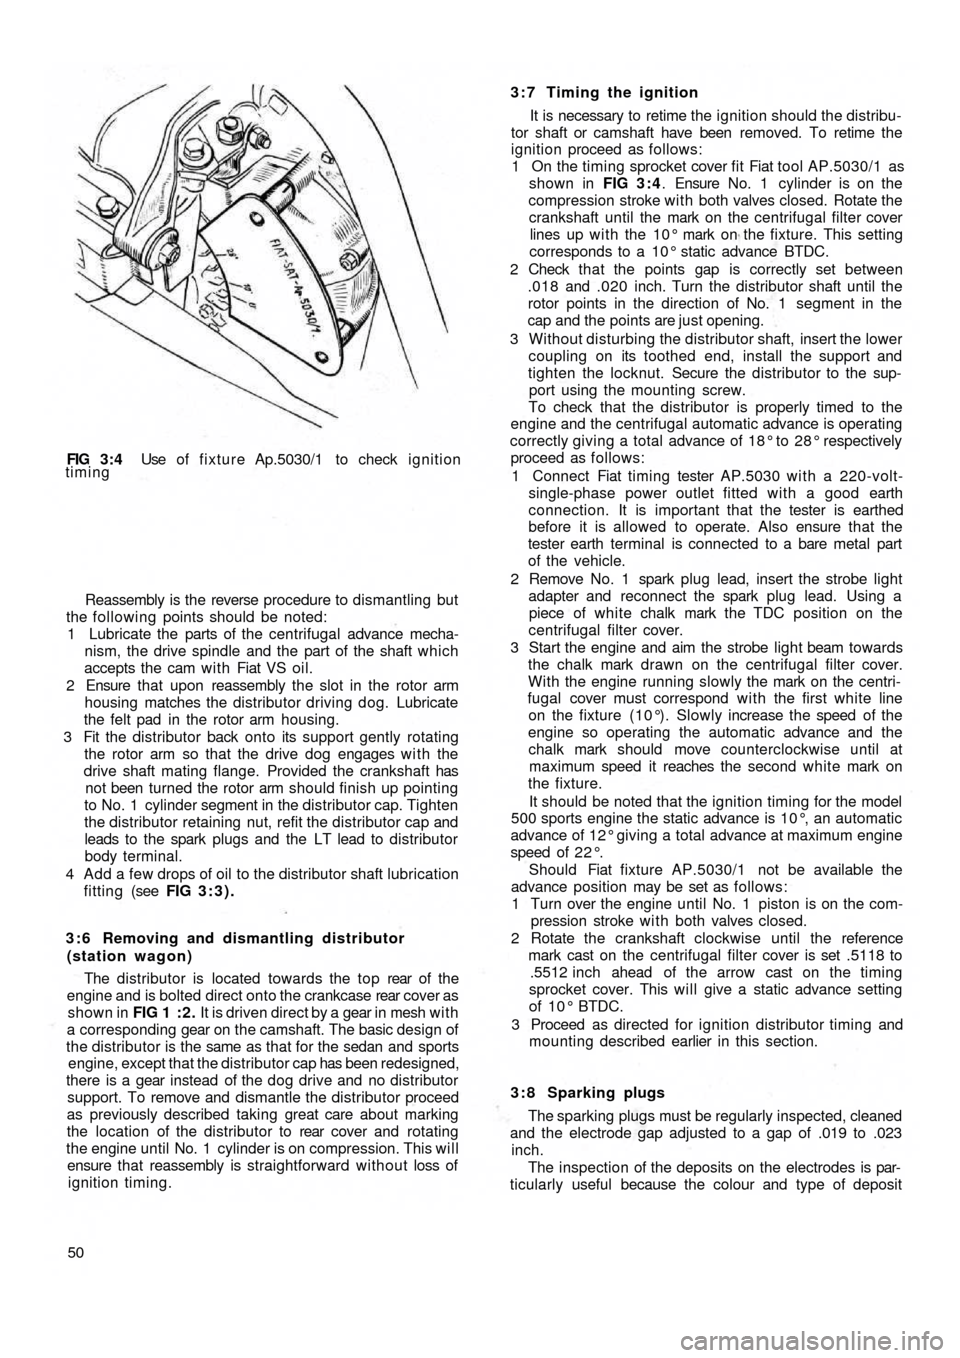 FIAT 500 1968 1.G Service Manual FIG  3 : 4  Use of fixture Ap.5030/1 to check ignition
timing
Reassembly is the reverse procedure to dismantling but
the following points should be noted:
1 Lubricate the parts of the centrifugal adva